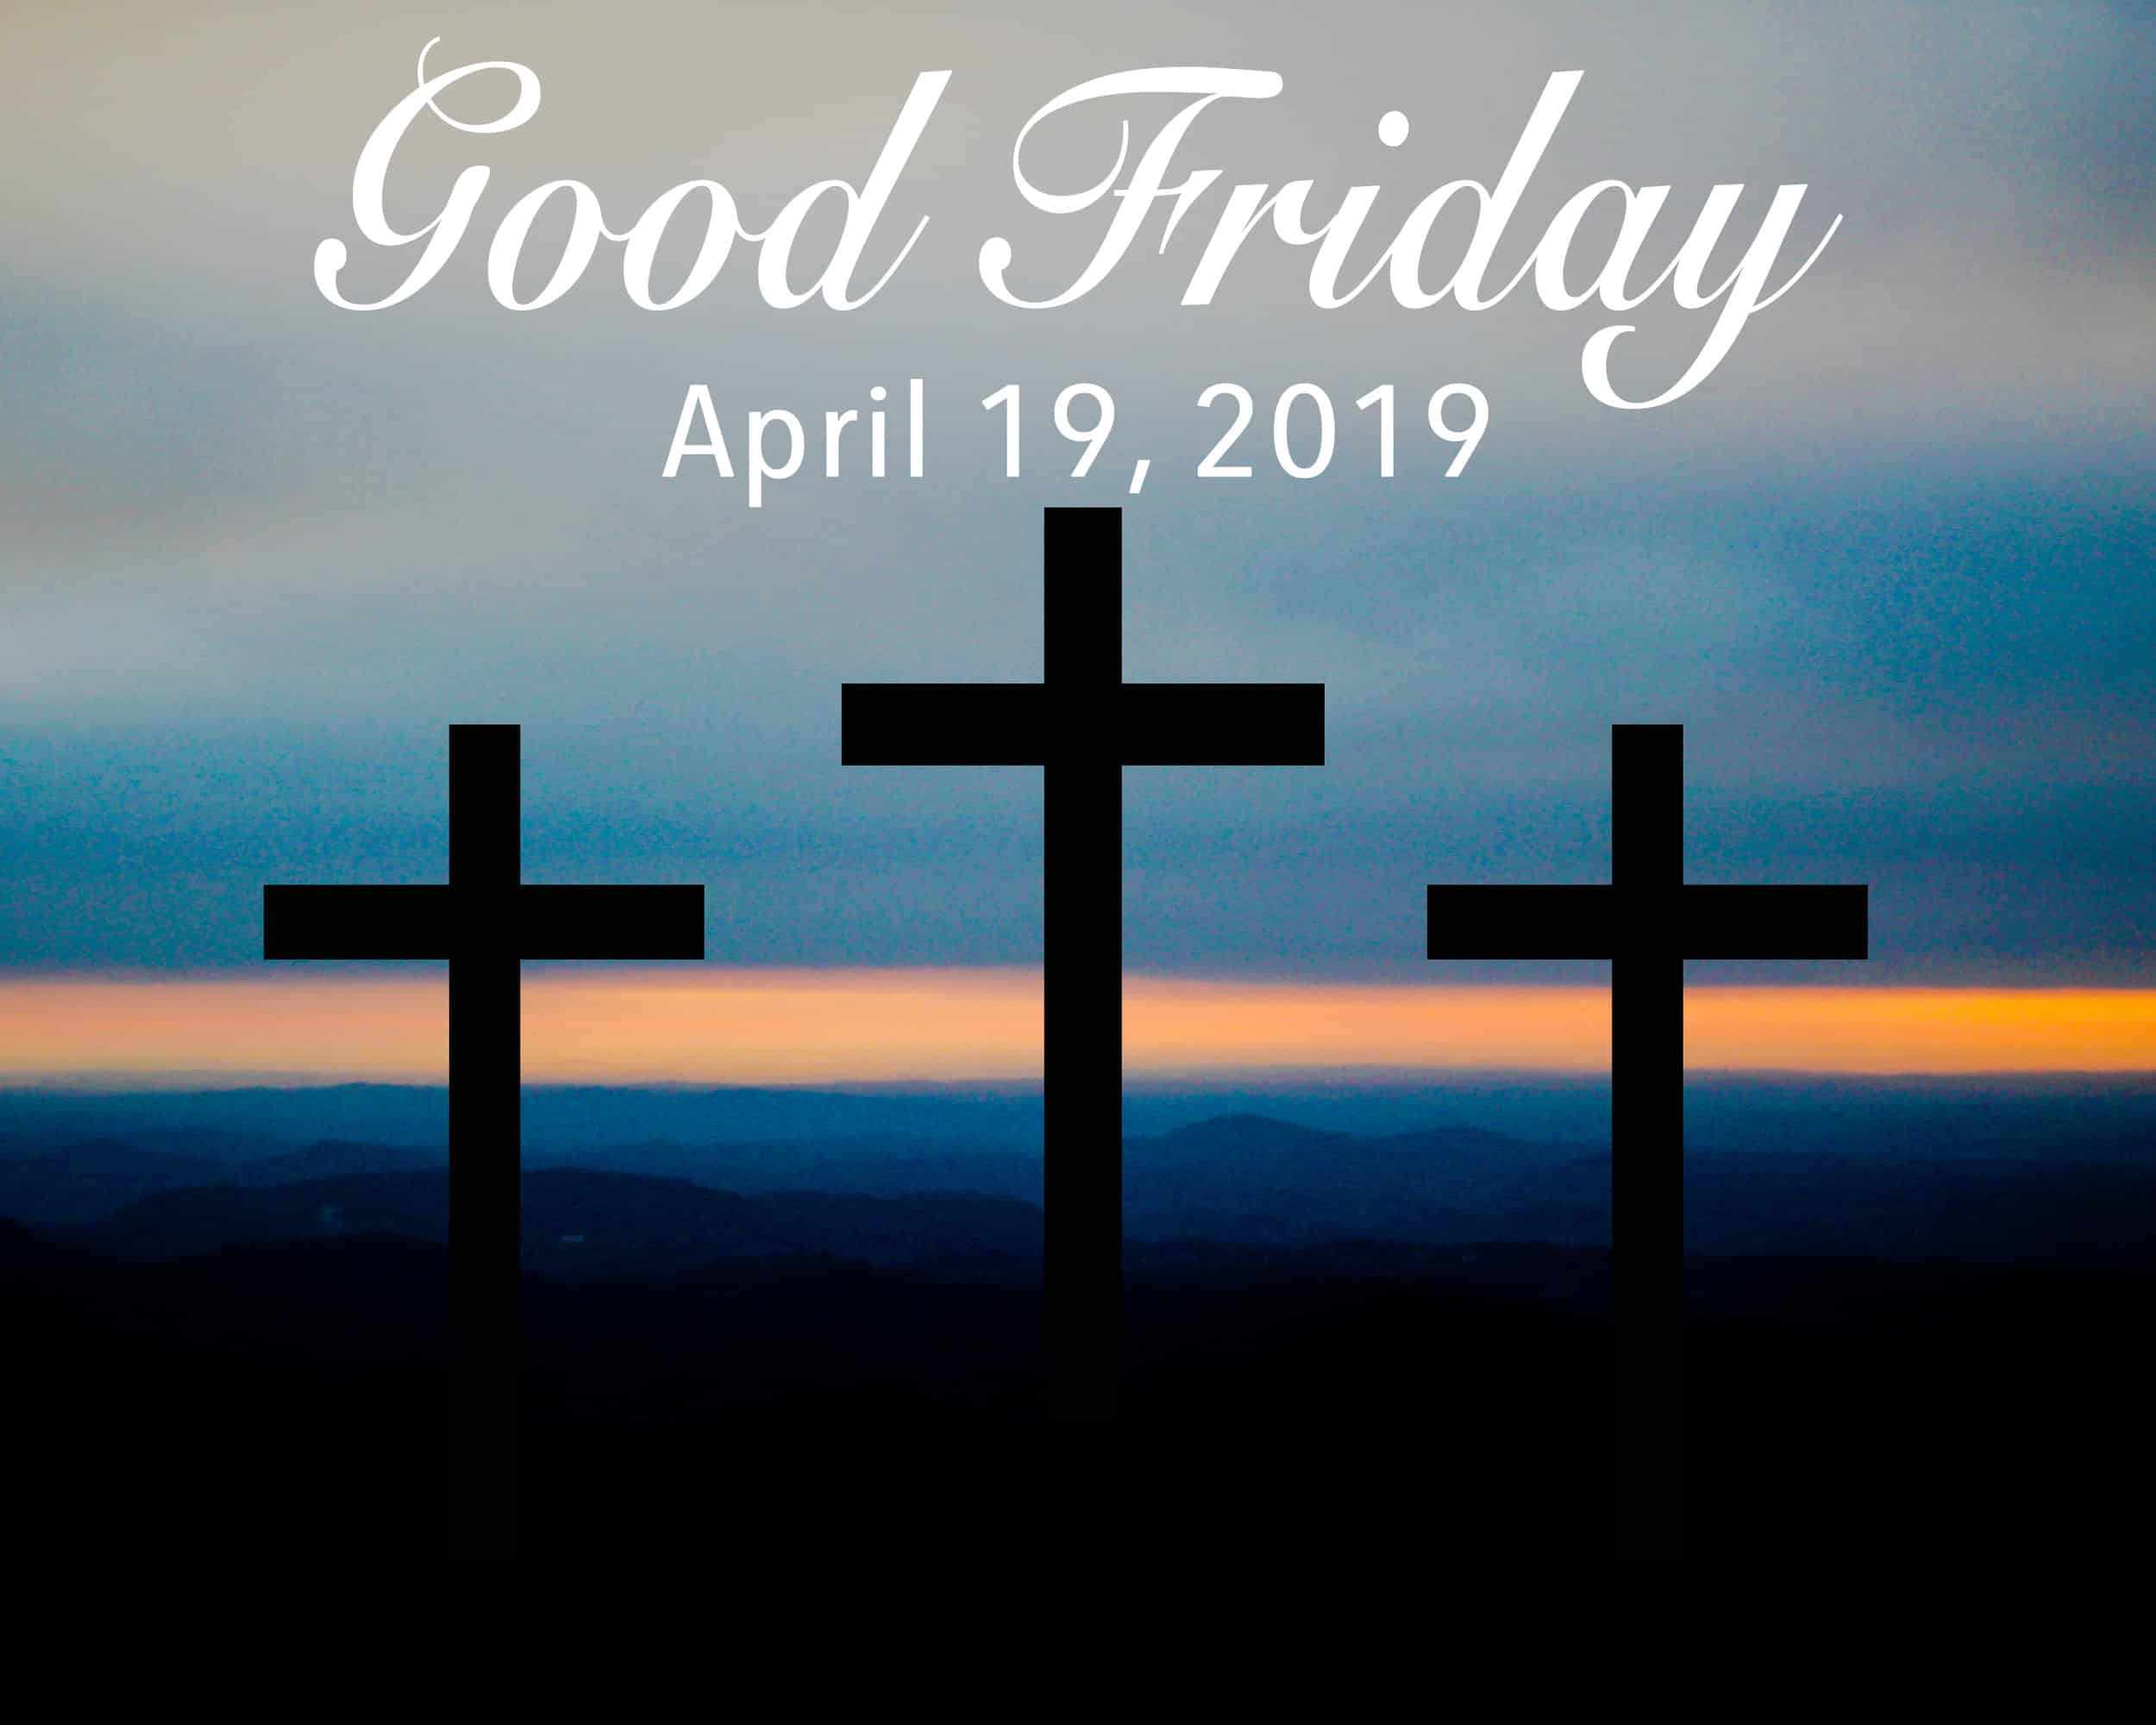 Have a relaxing Good Friday today because there are no classes. However, remember the reason why we celebrate today.